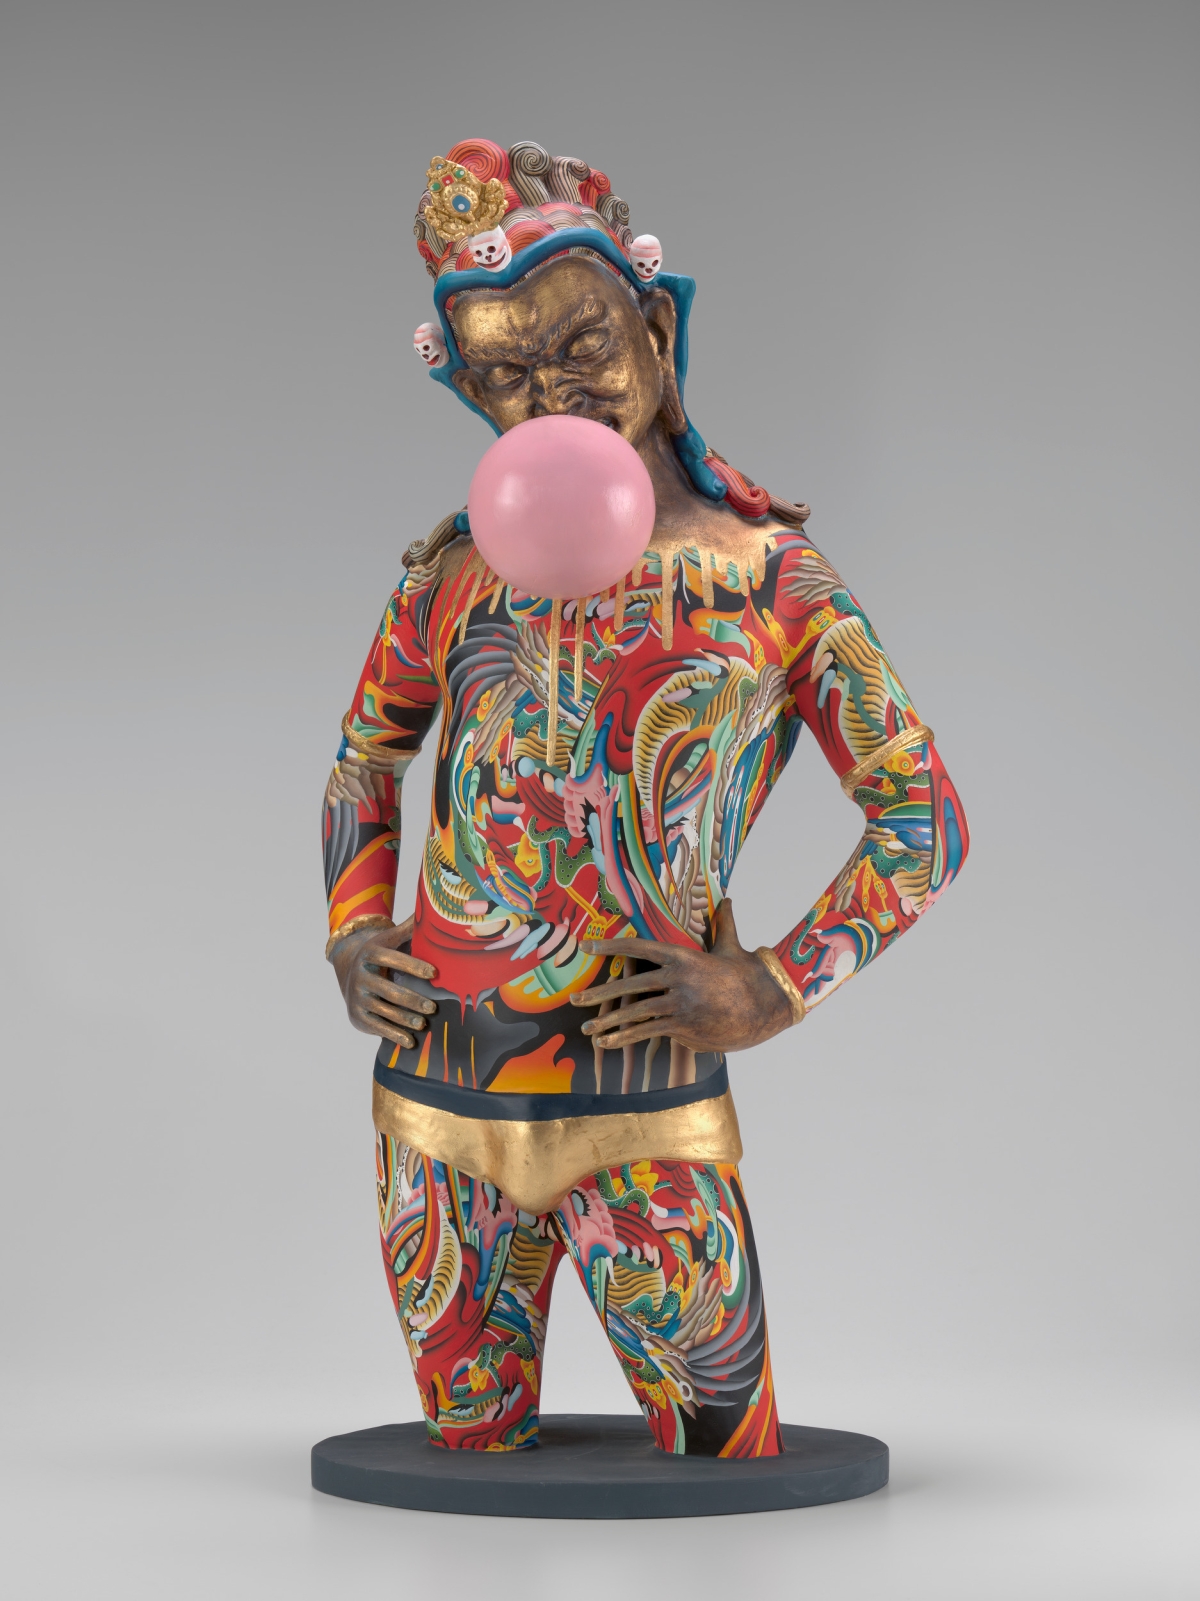 ‘Skippers (Kneedeep)’, 2019-20, Tsherin Sherpa (American, born Nepal, 1968), in collaboration with Regal Studios, Kathmandu, gold leaf, acrylic and ink on fiberglass. Virginia Museum of Fine Arts, 2021.66, Photo by David Stover